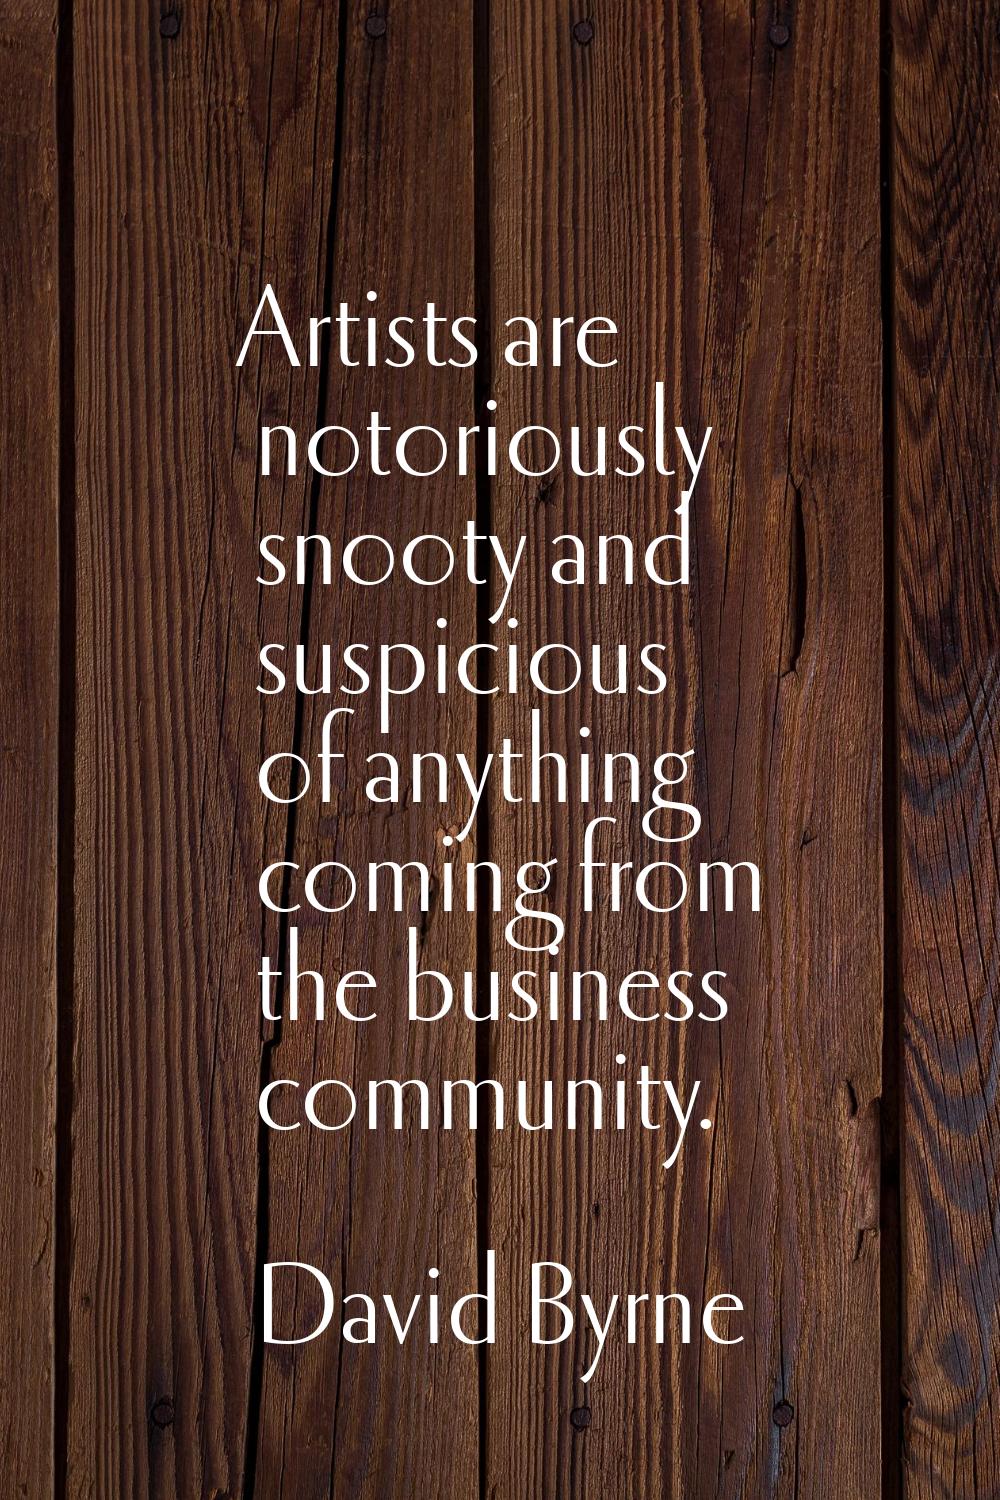 Artists are notoriously snooty and suspicious of anything coming from the business community.